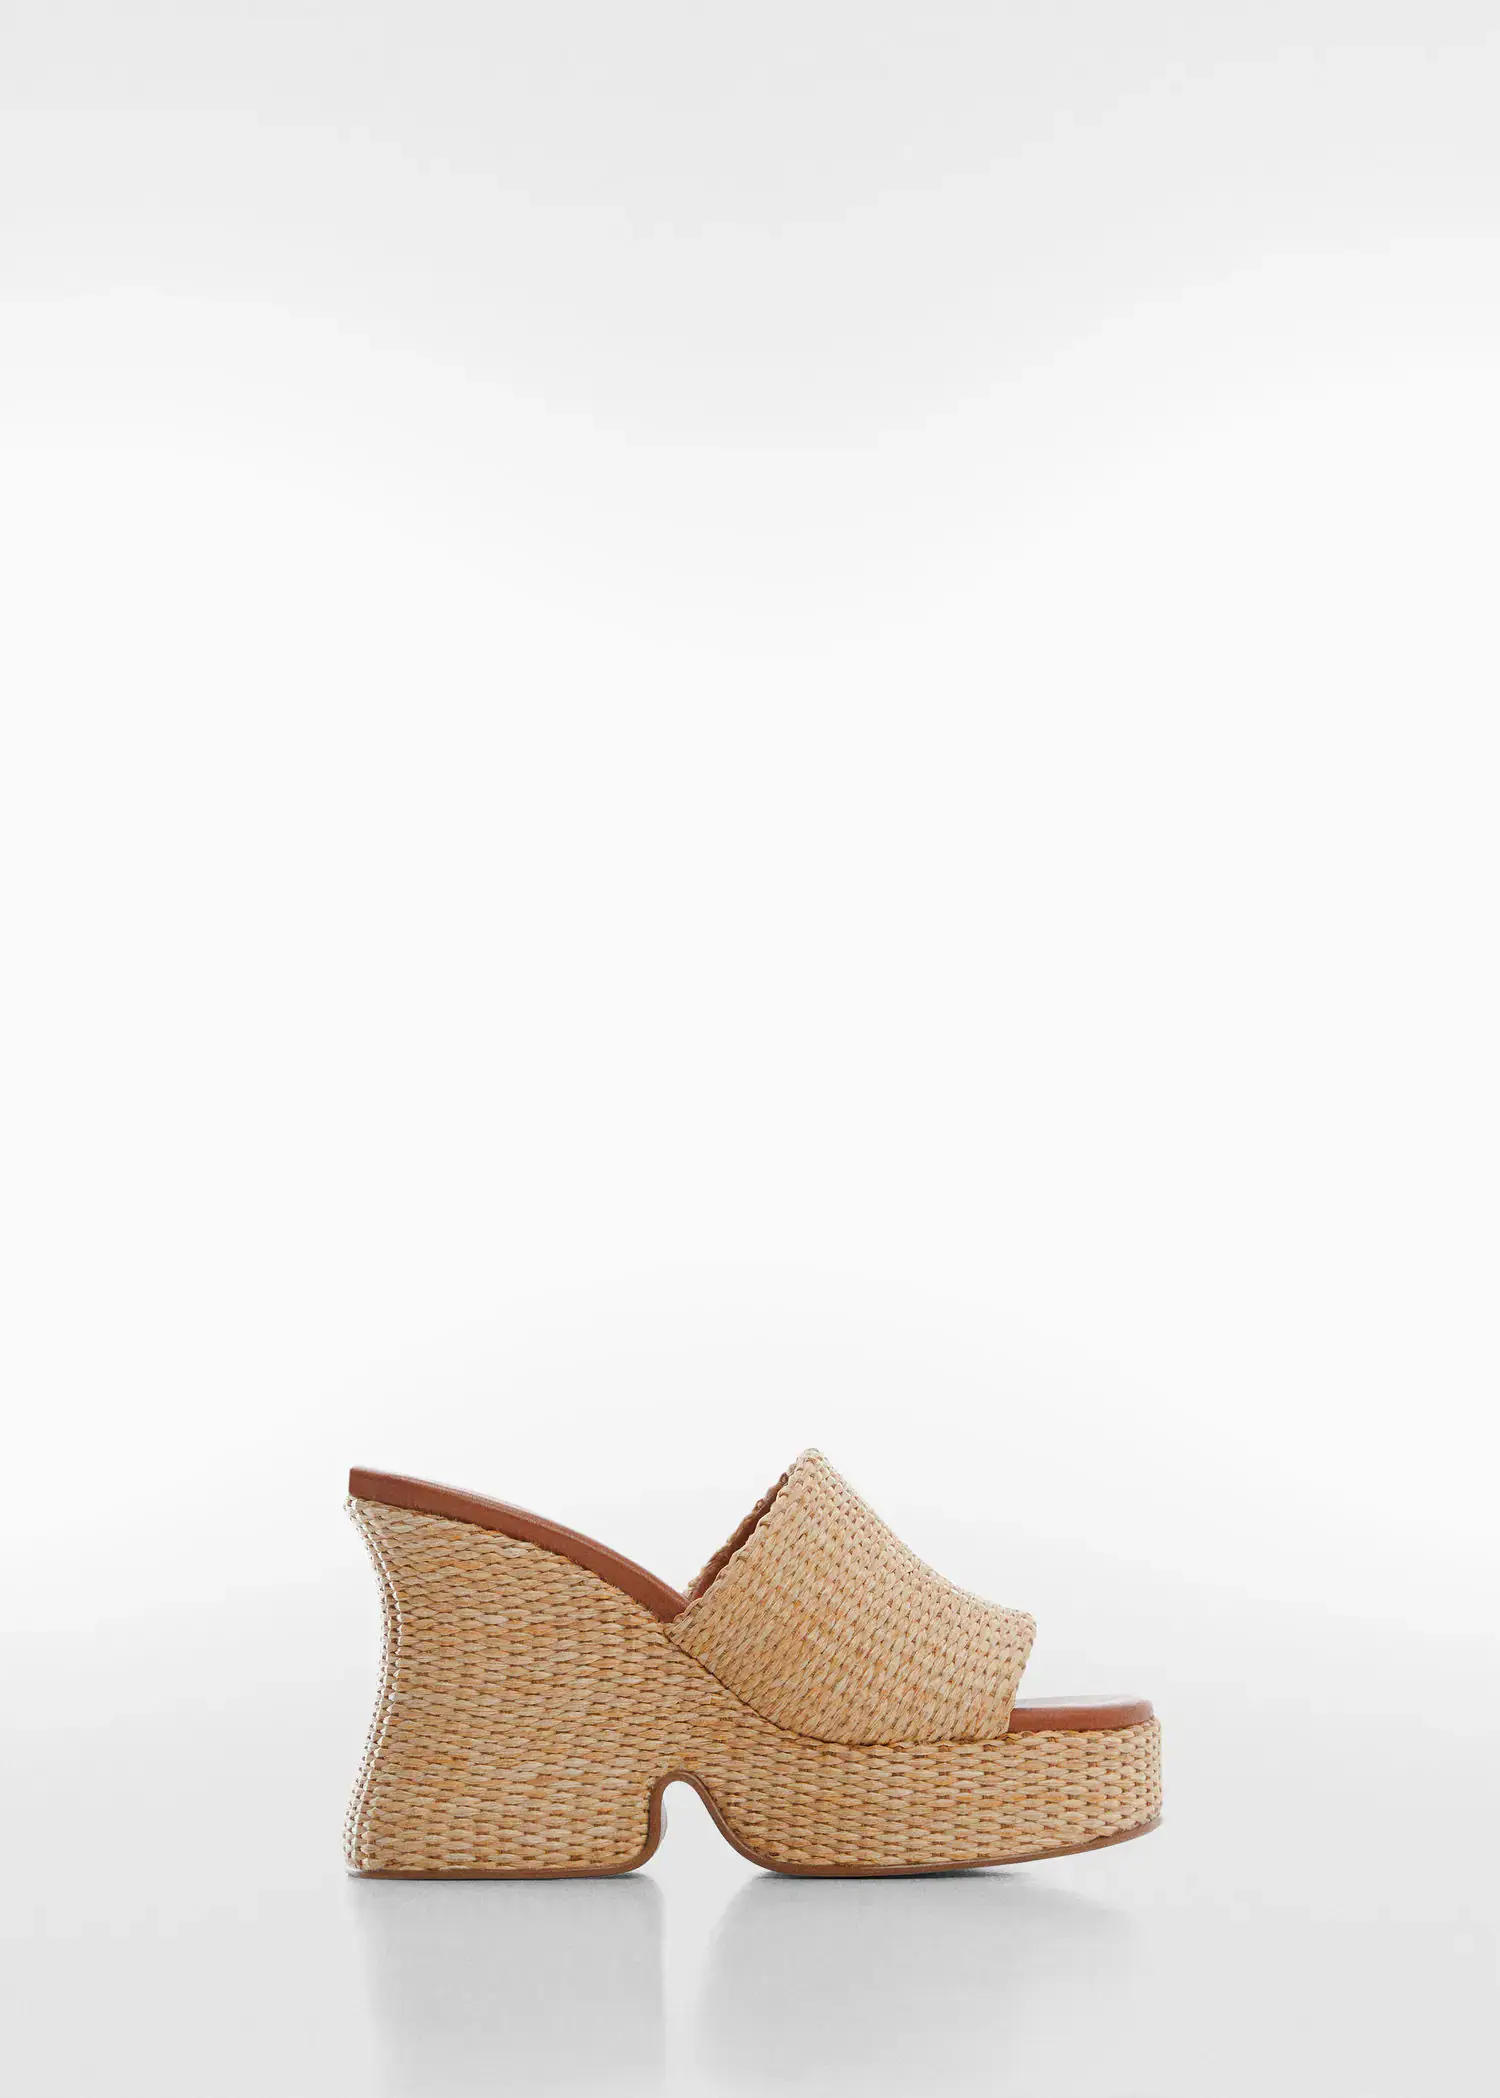 Mango Natural fibre wedge sandals. a pair of shoes that are on the ground. 